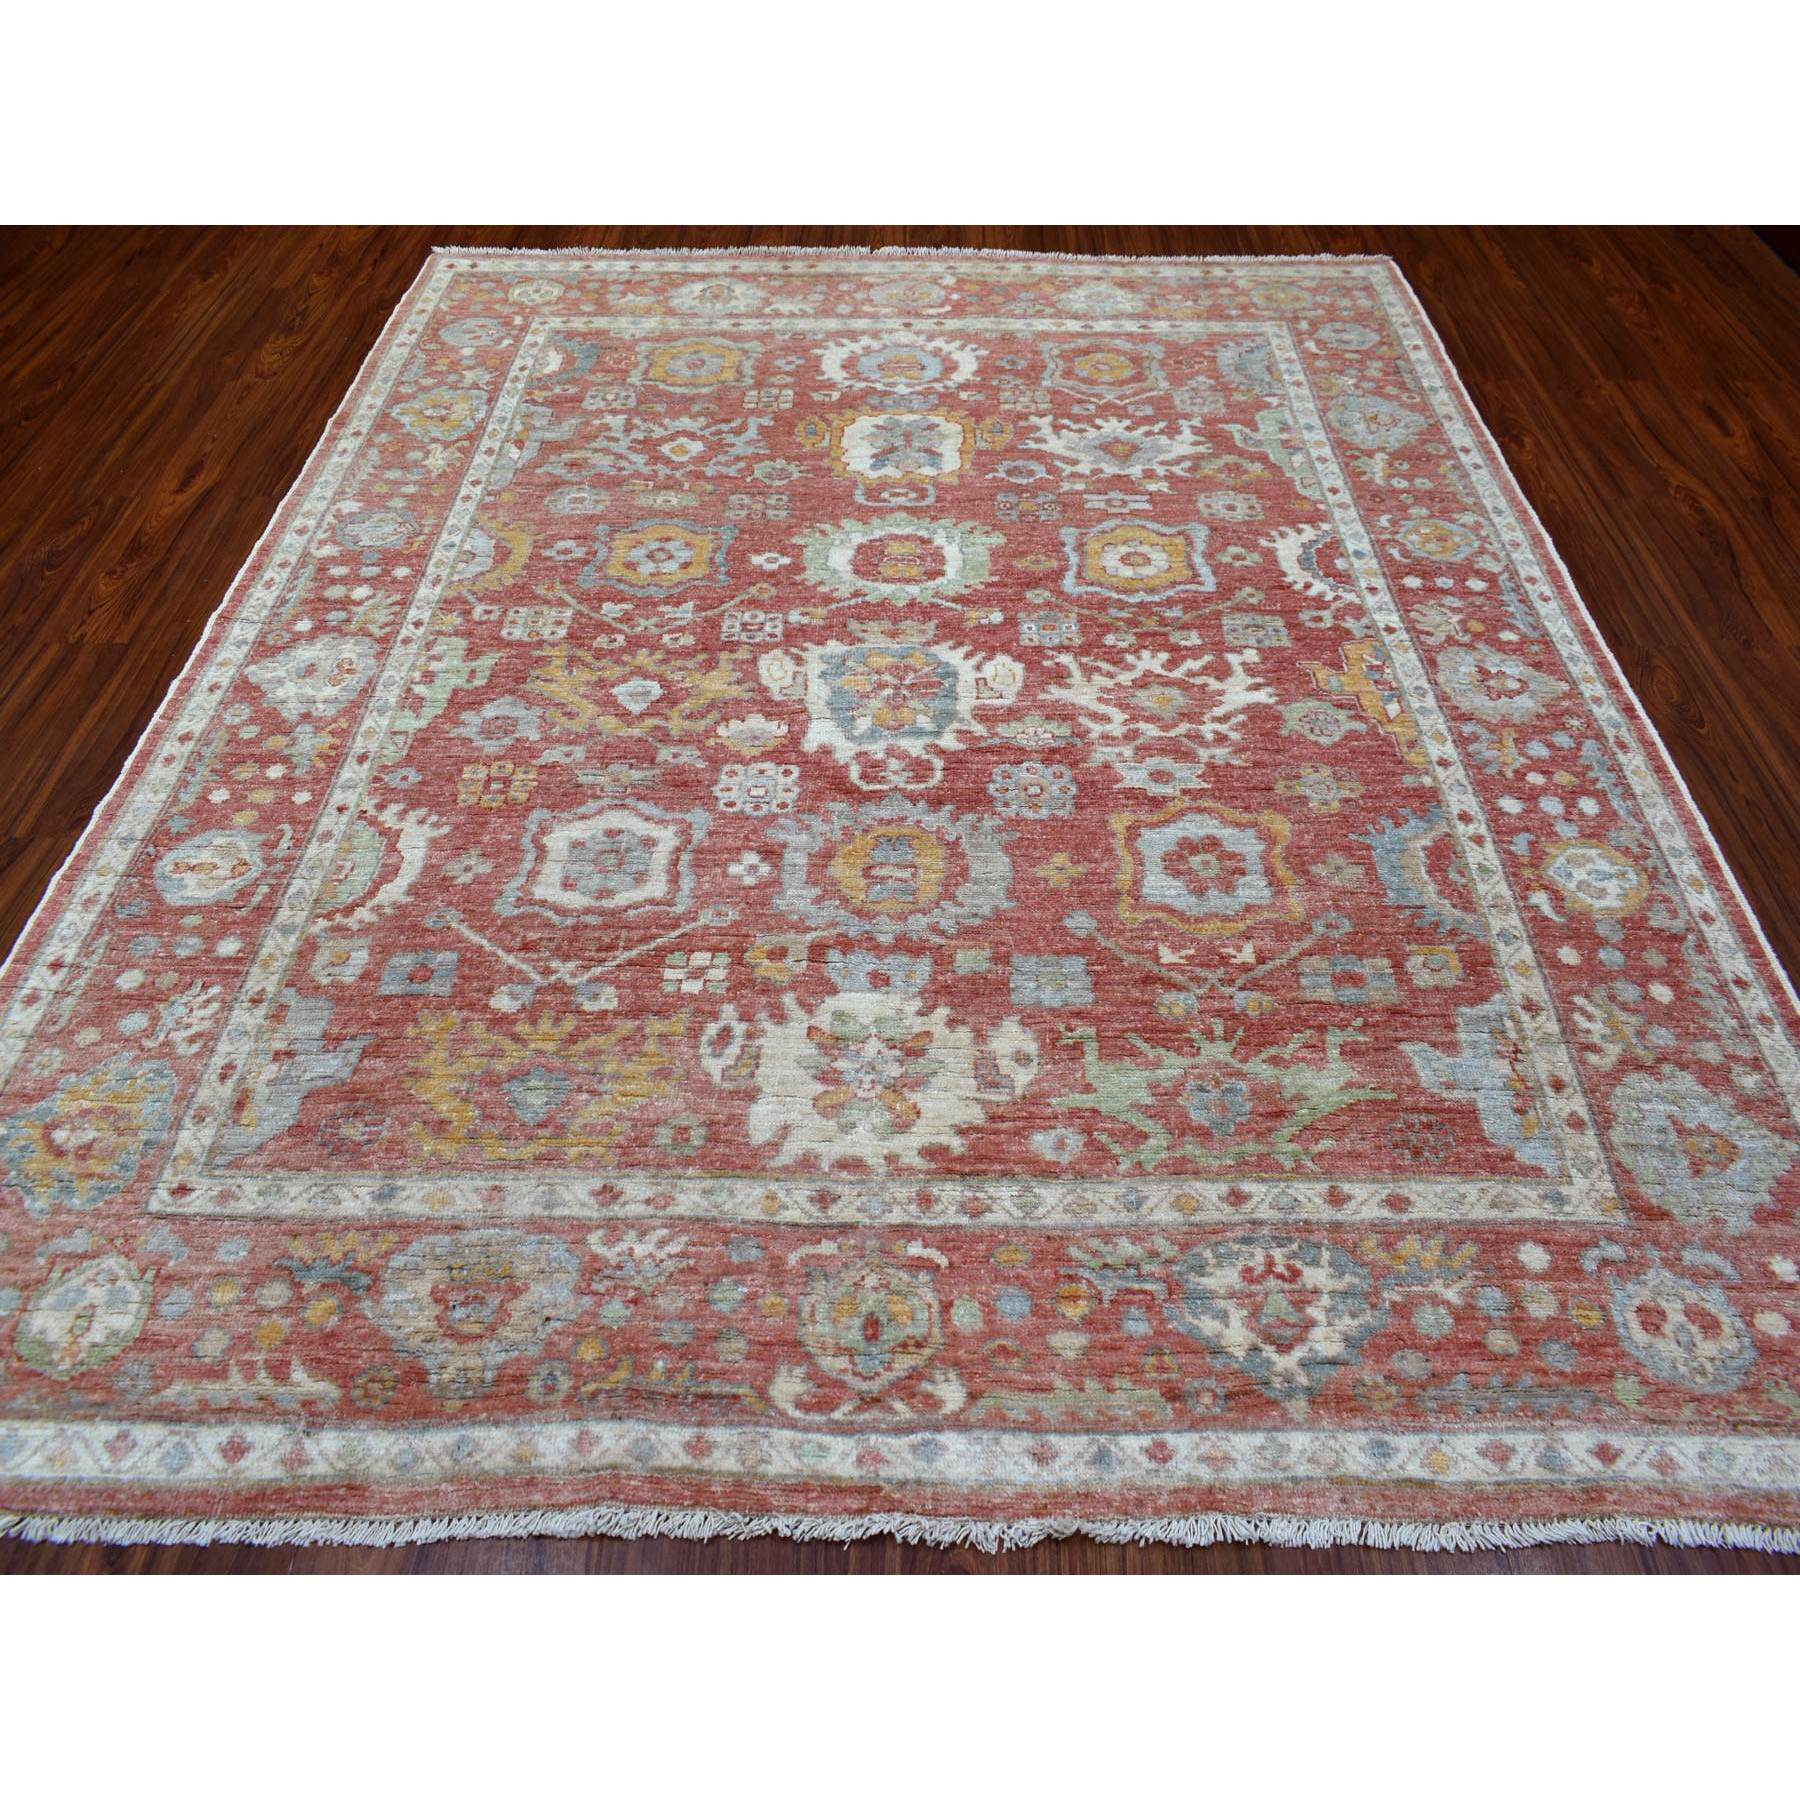 8'x9'7" Coral Red Beautiful Floral Pattern Afghan Angora Oushak Hand Woven Pliable Wool  Oriental Rug 